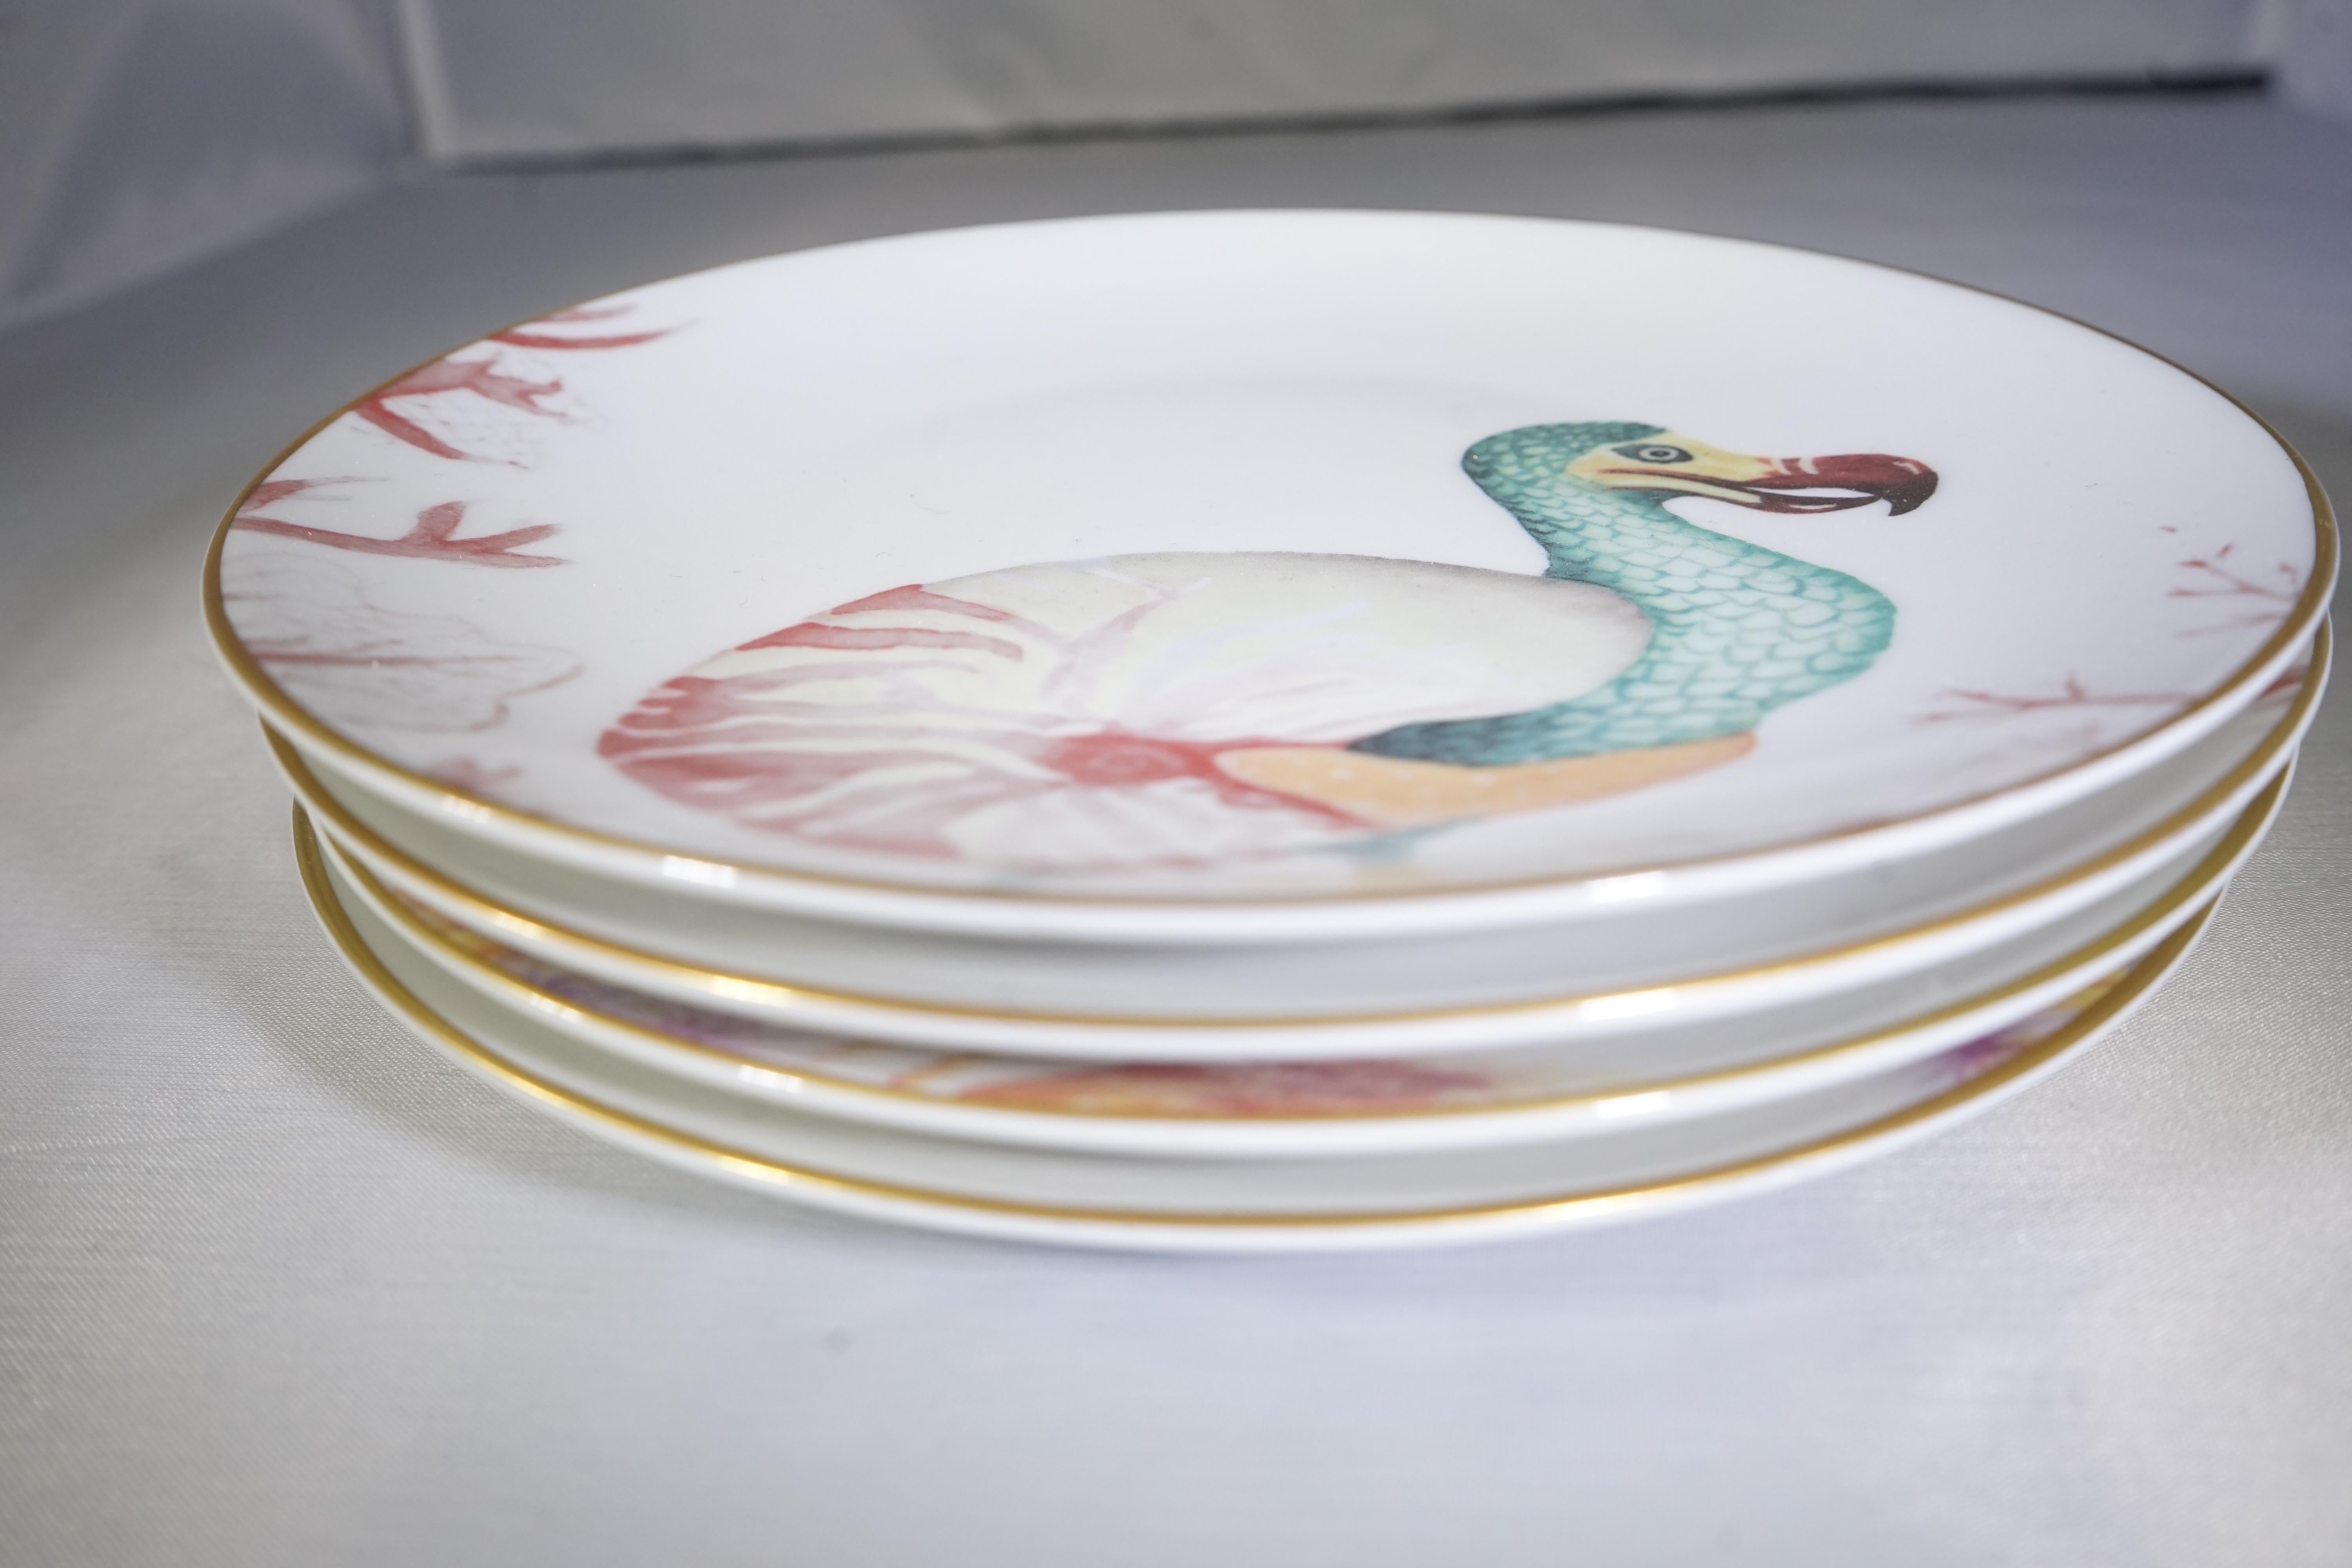 Contemporary Italian set of four whimsical underwater-themed plates crafted in Italy using Limoges porcelain by Dalwin Designs.